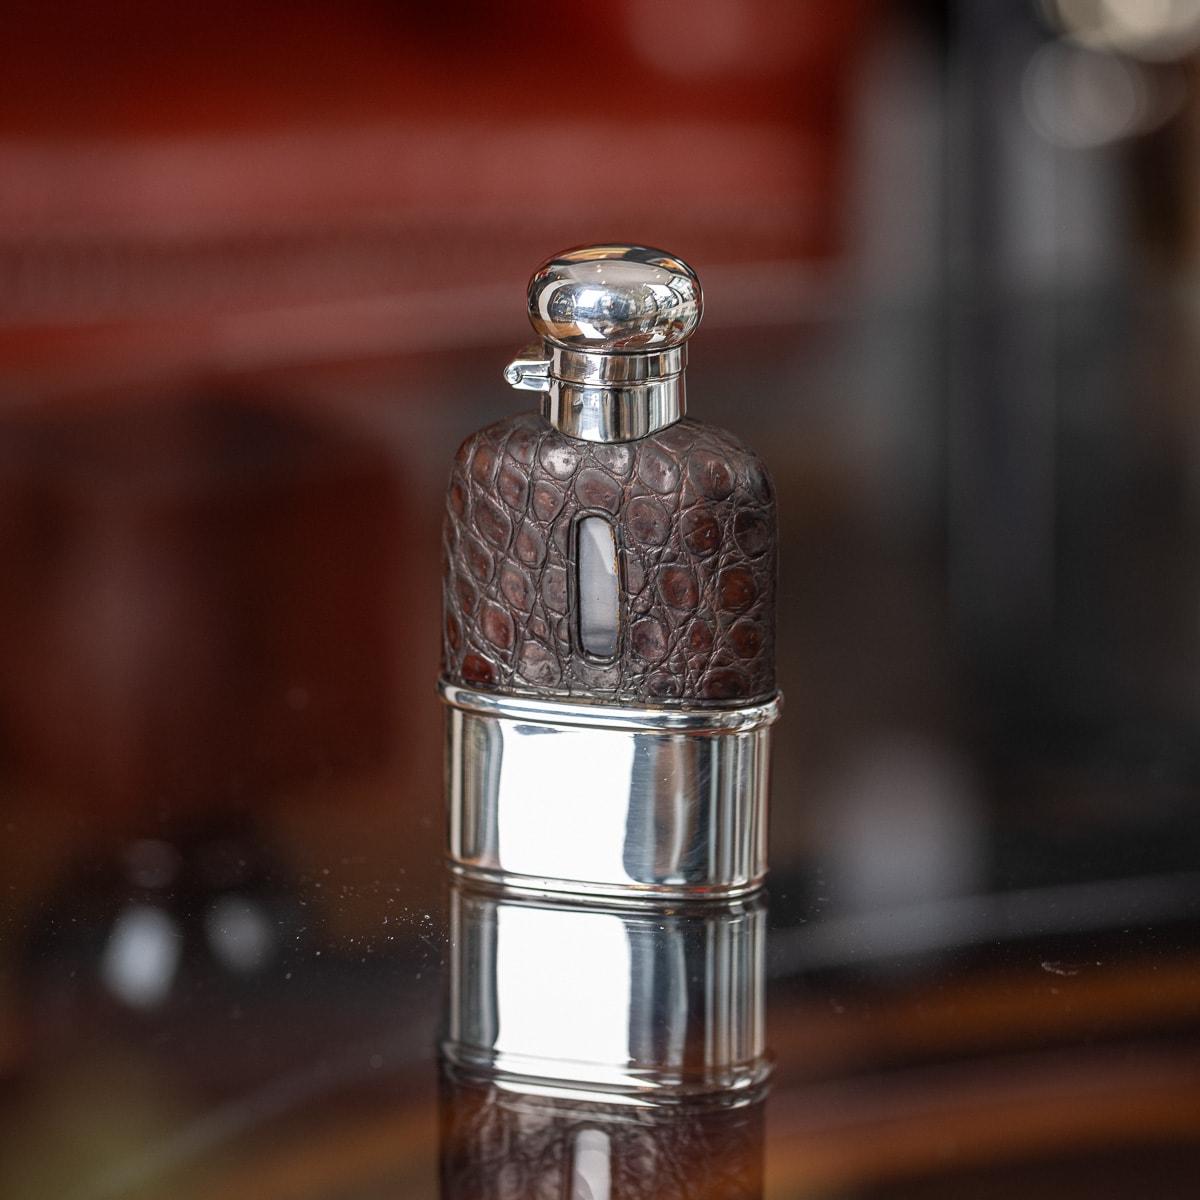 Antique early-20th Century Edwardian solid silver, blown glass and bound in sumptuous crocodile leather hip flask, of rounded rectangular form, with a pull off cup, top mounted with a hinged and screw lid. Hallmarked with English silver (925